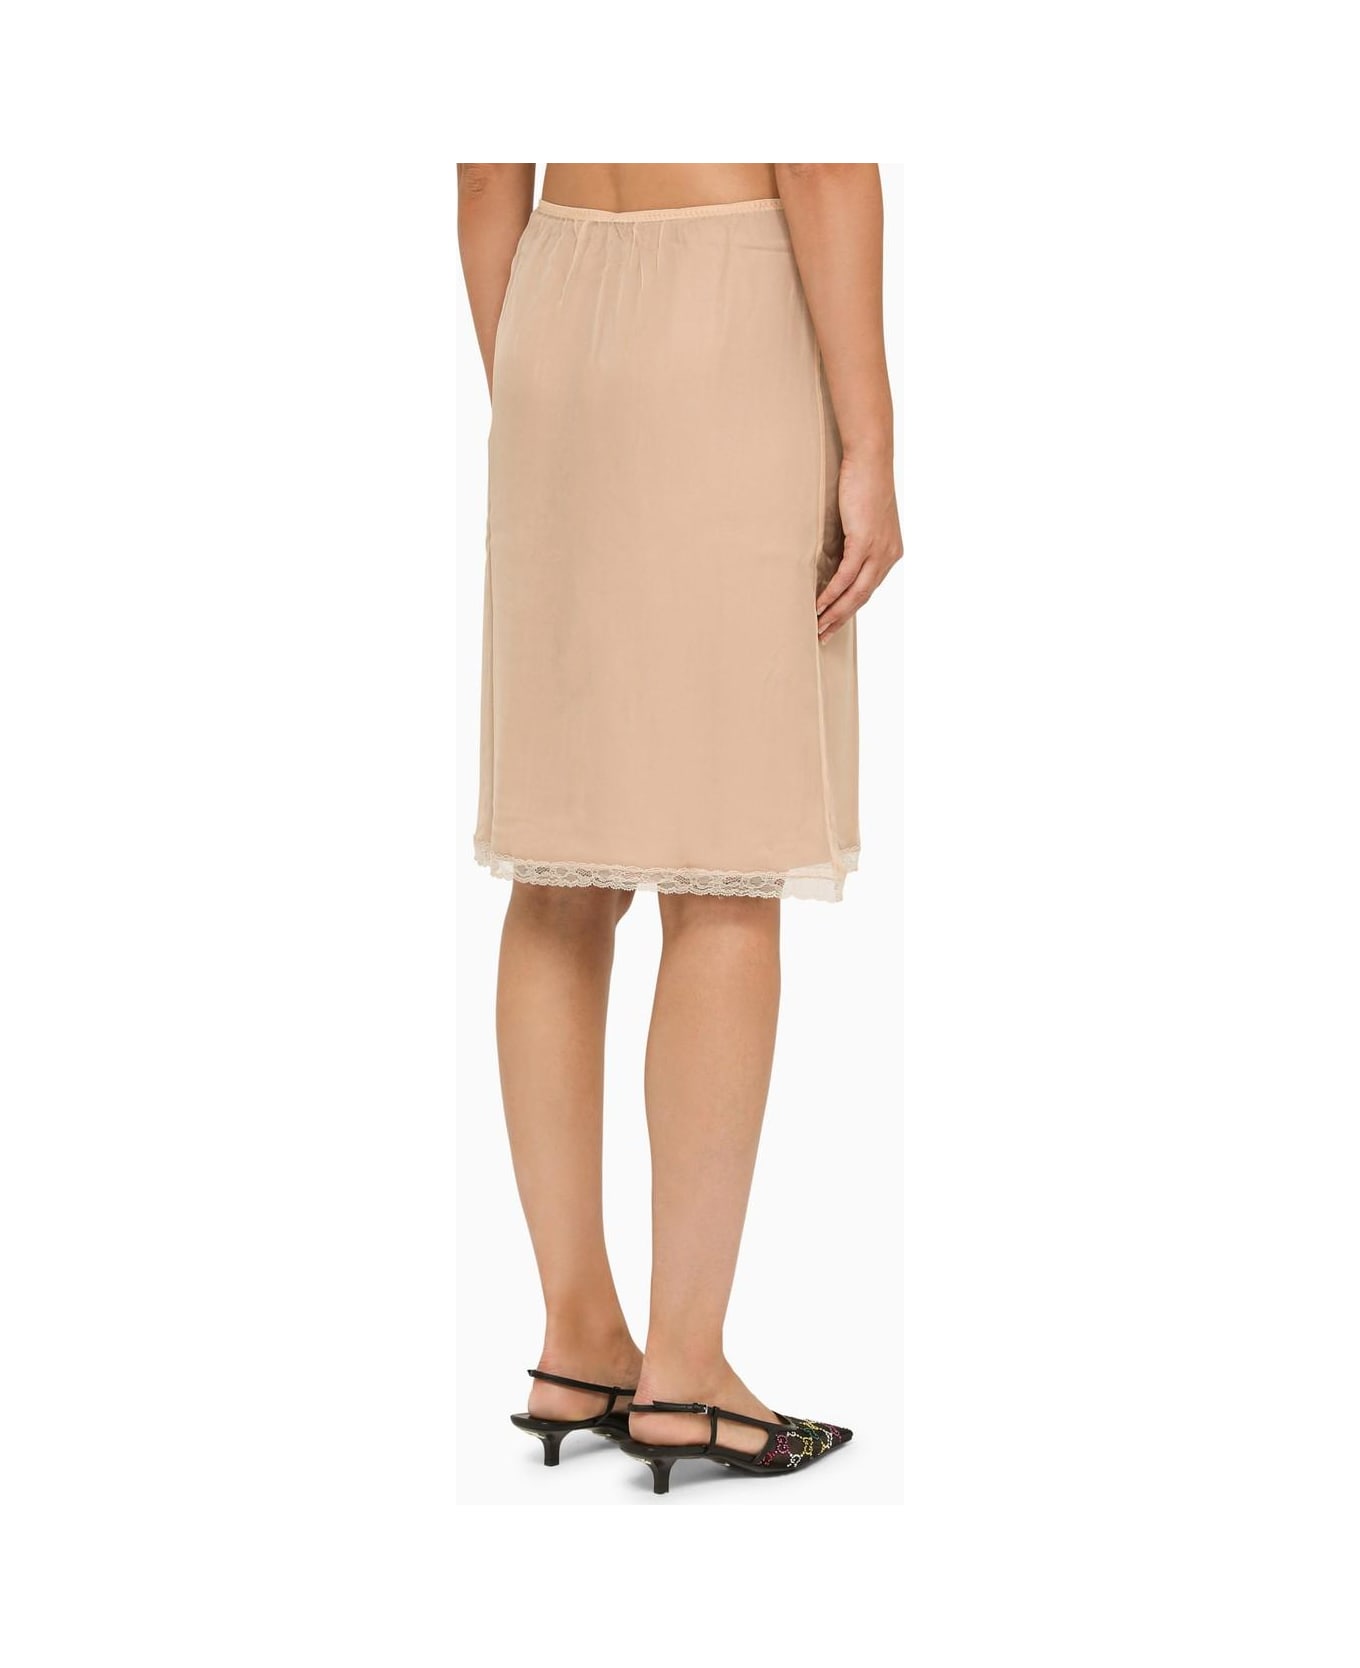 Gucci Nude Acetate Skirt With Lace - Powder